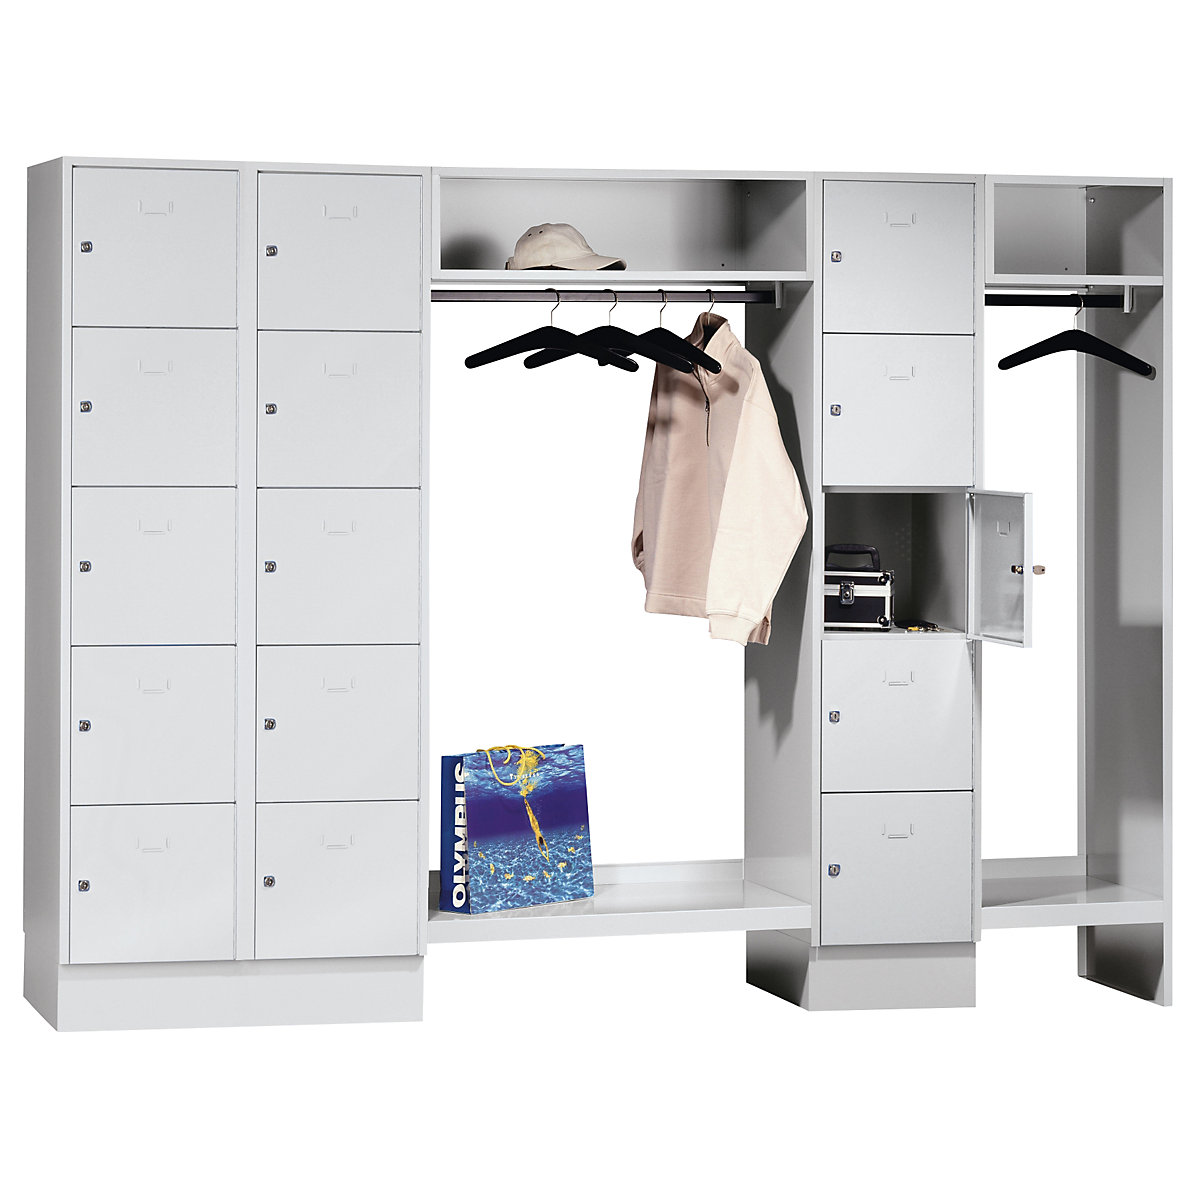 Cloakroom locker system – Wolf, 15 compartments left / centre, 15 coat hangers, overall width 2520 mm, compartment width 398 mm, light grey-7